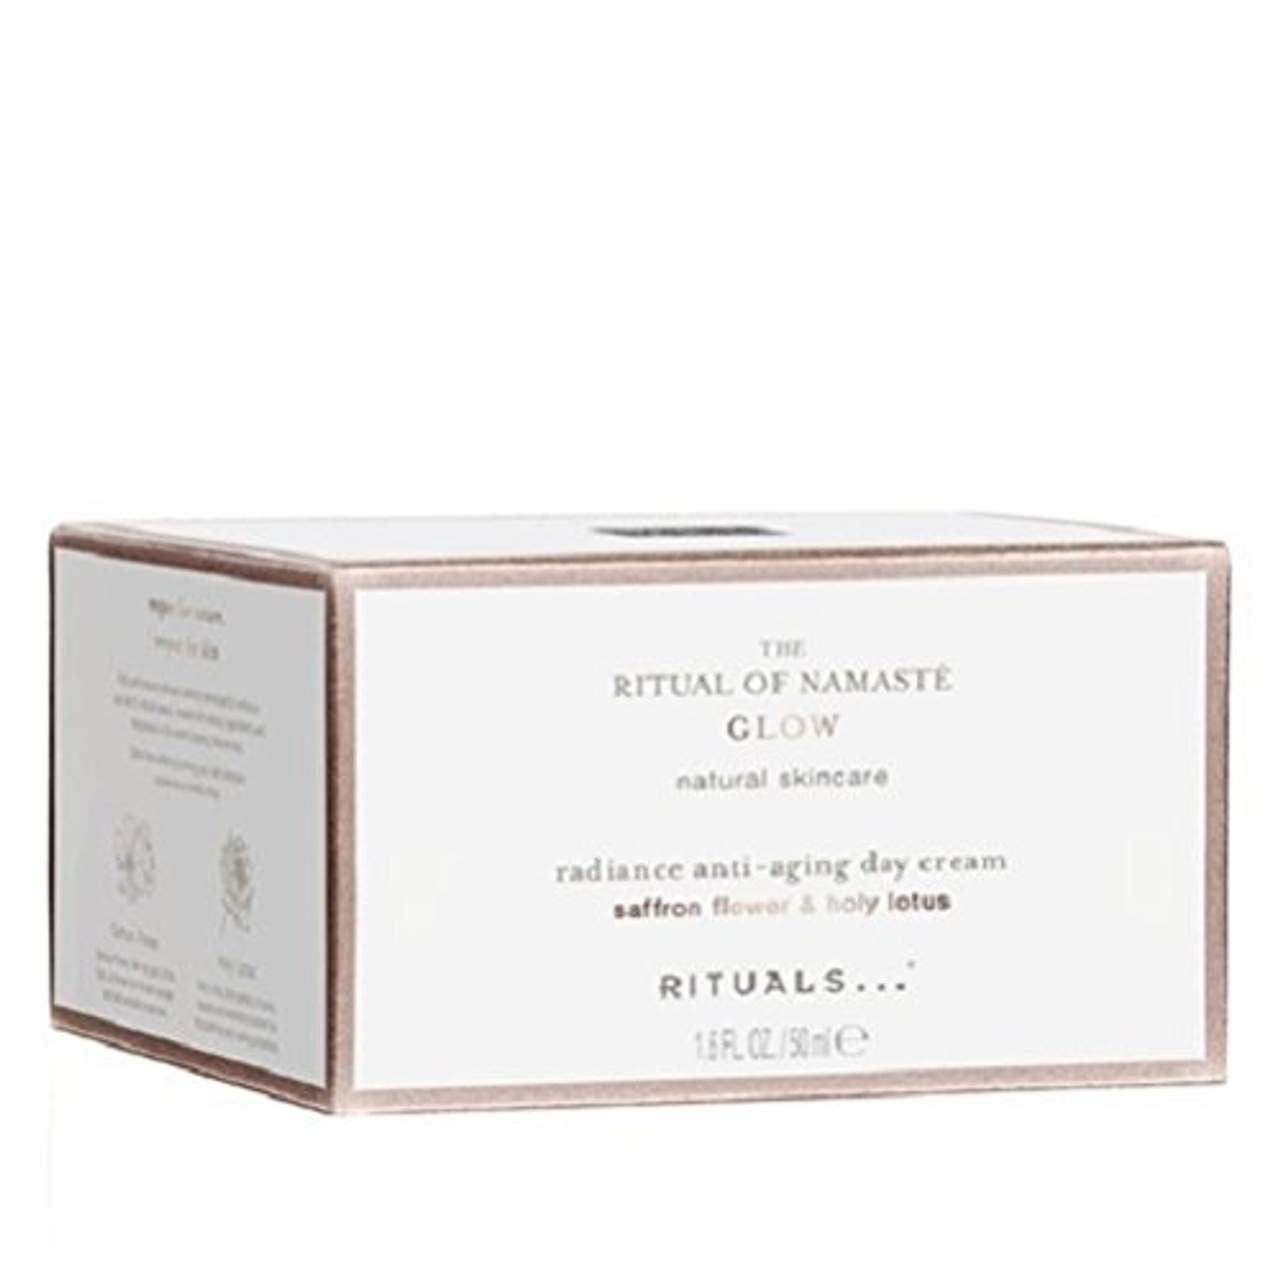 Rituals The Ritual of Namasté Radiance Anti-Aging leichte Tagescreme